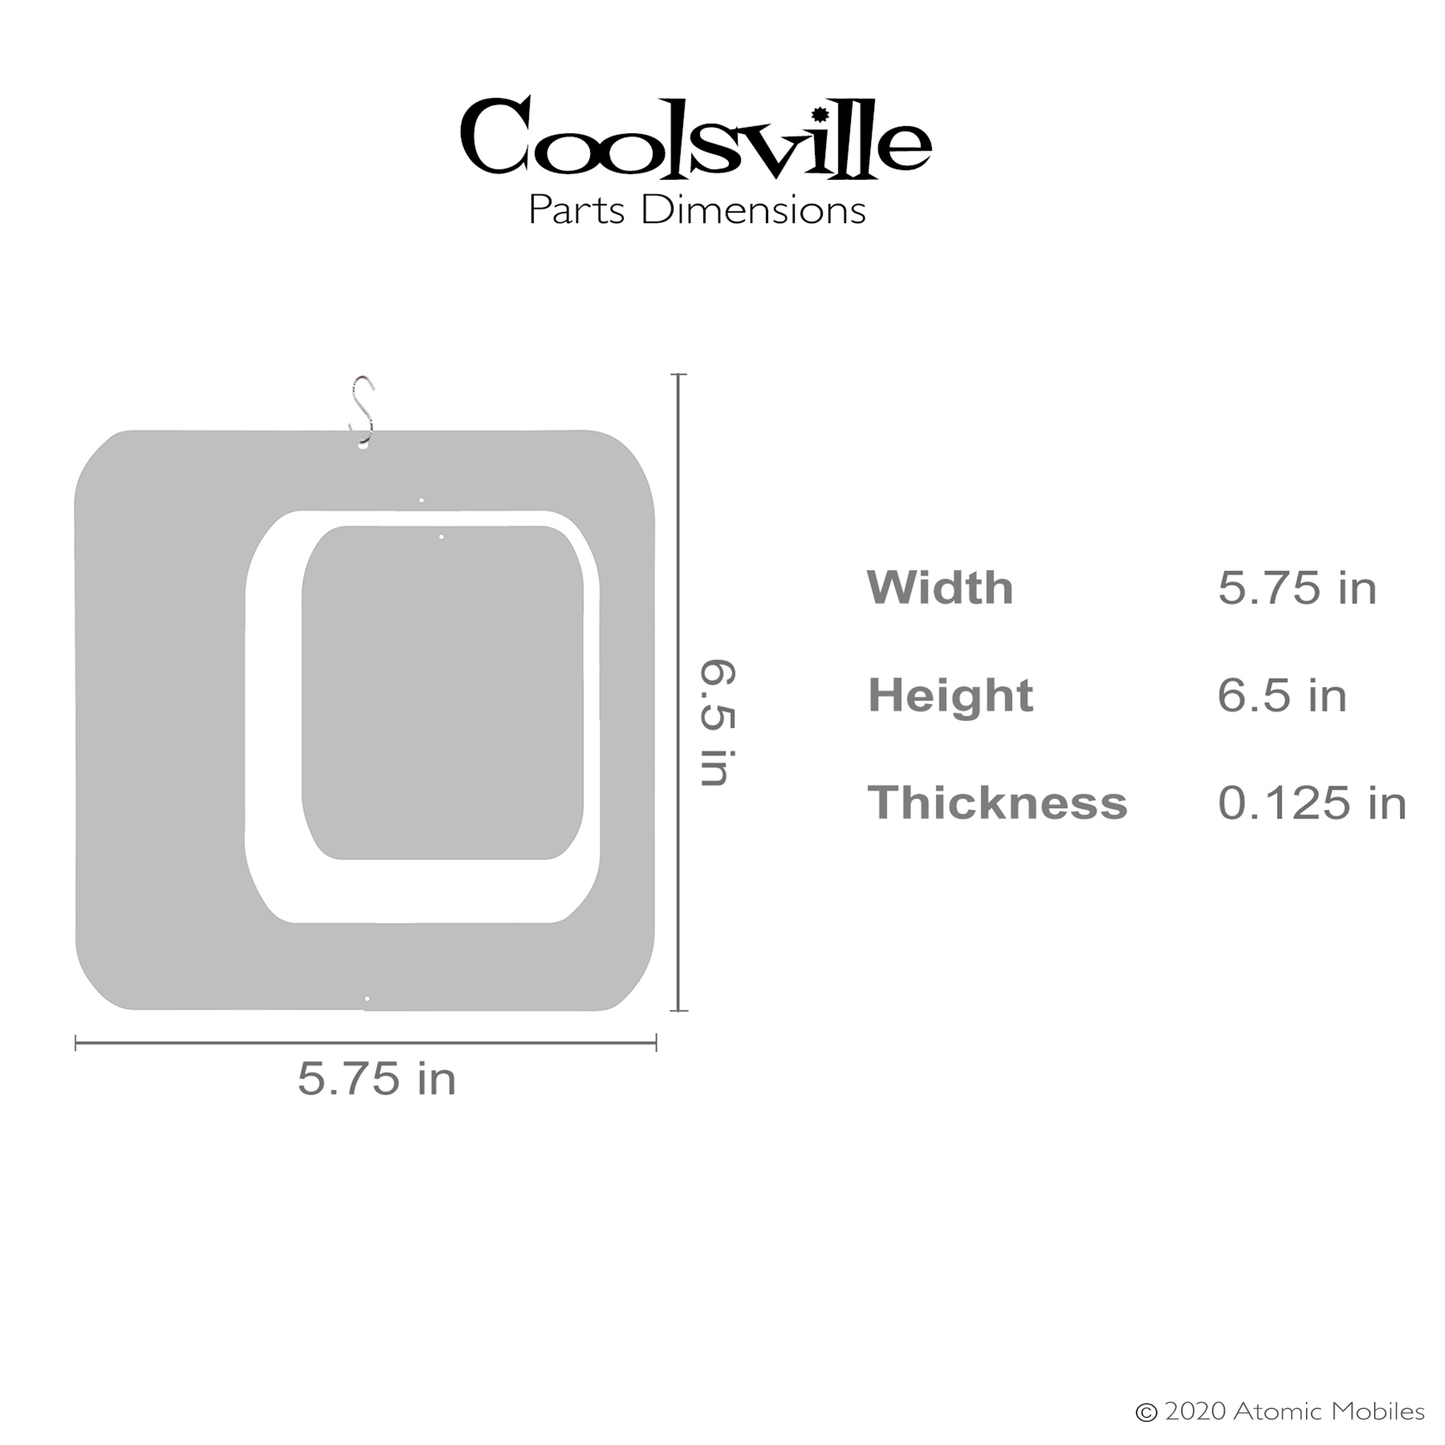 Dimentions of Coolsville DIY Kit to make LGBTQ+ Unity Wall Art, Mobile, Curtain, or Room Divider by AtomicMobiles.com